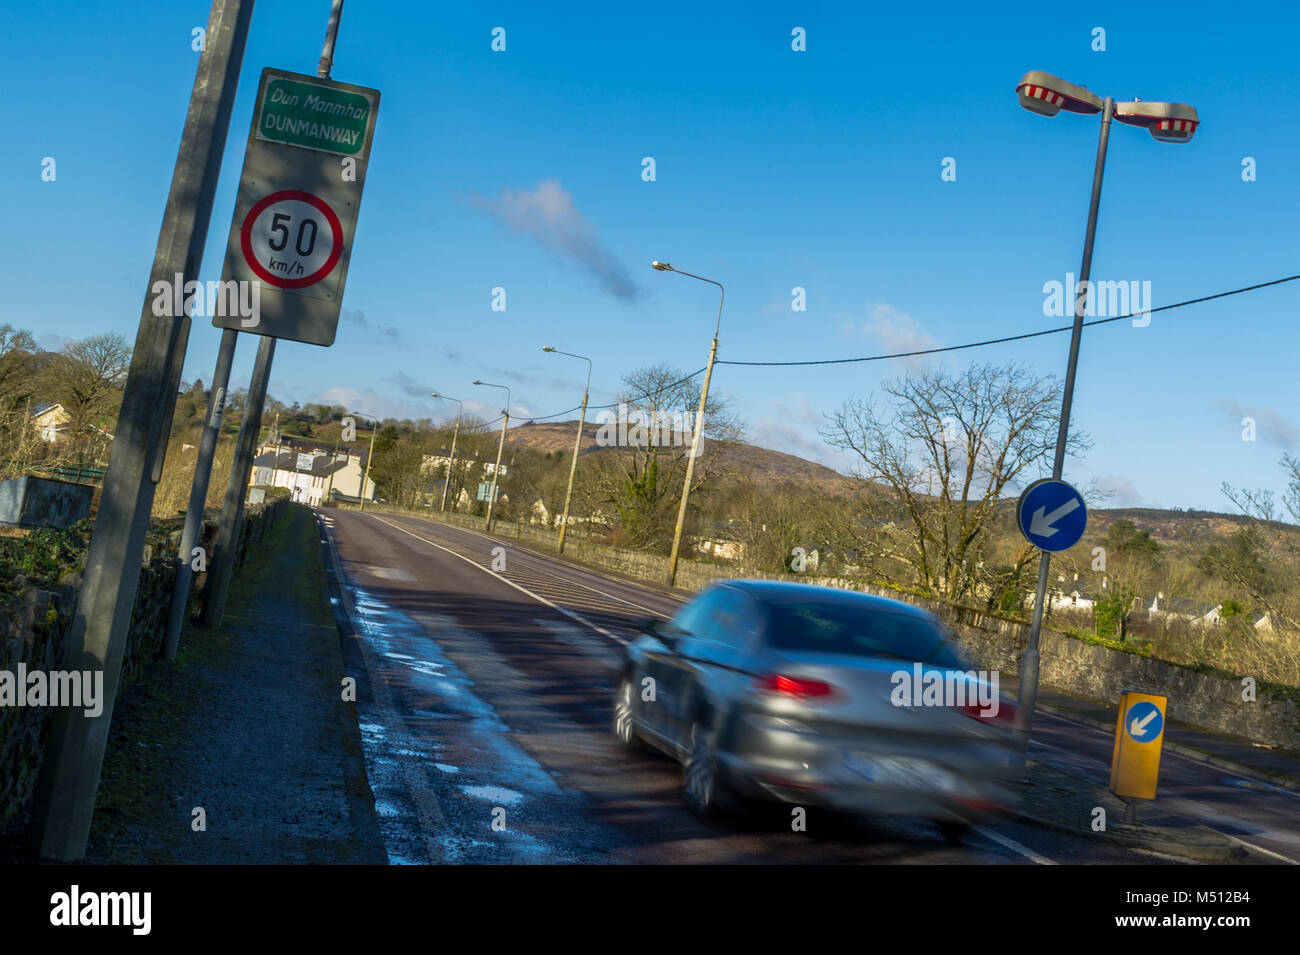 Speeding car passes a 50 km/h speed limit sign in Dunmanway, County Cork, Ireland. Breaking the speed limit, road safety concept. Stock Photo